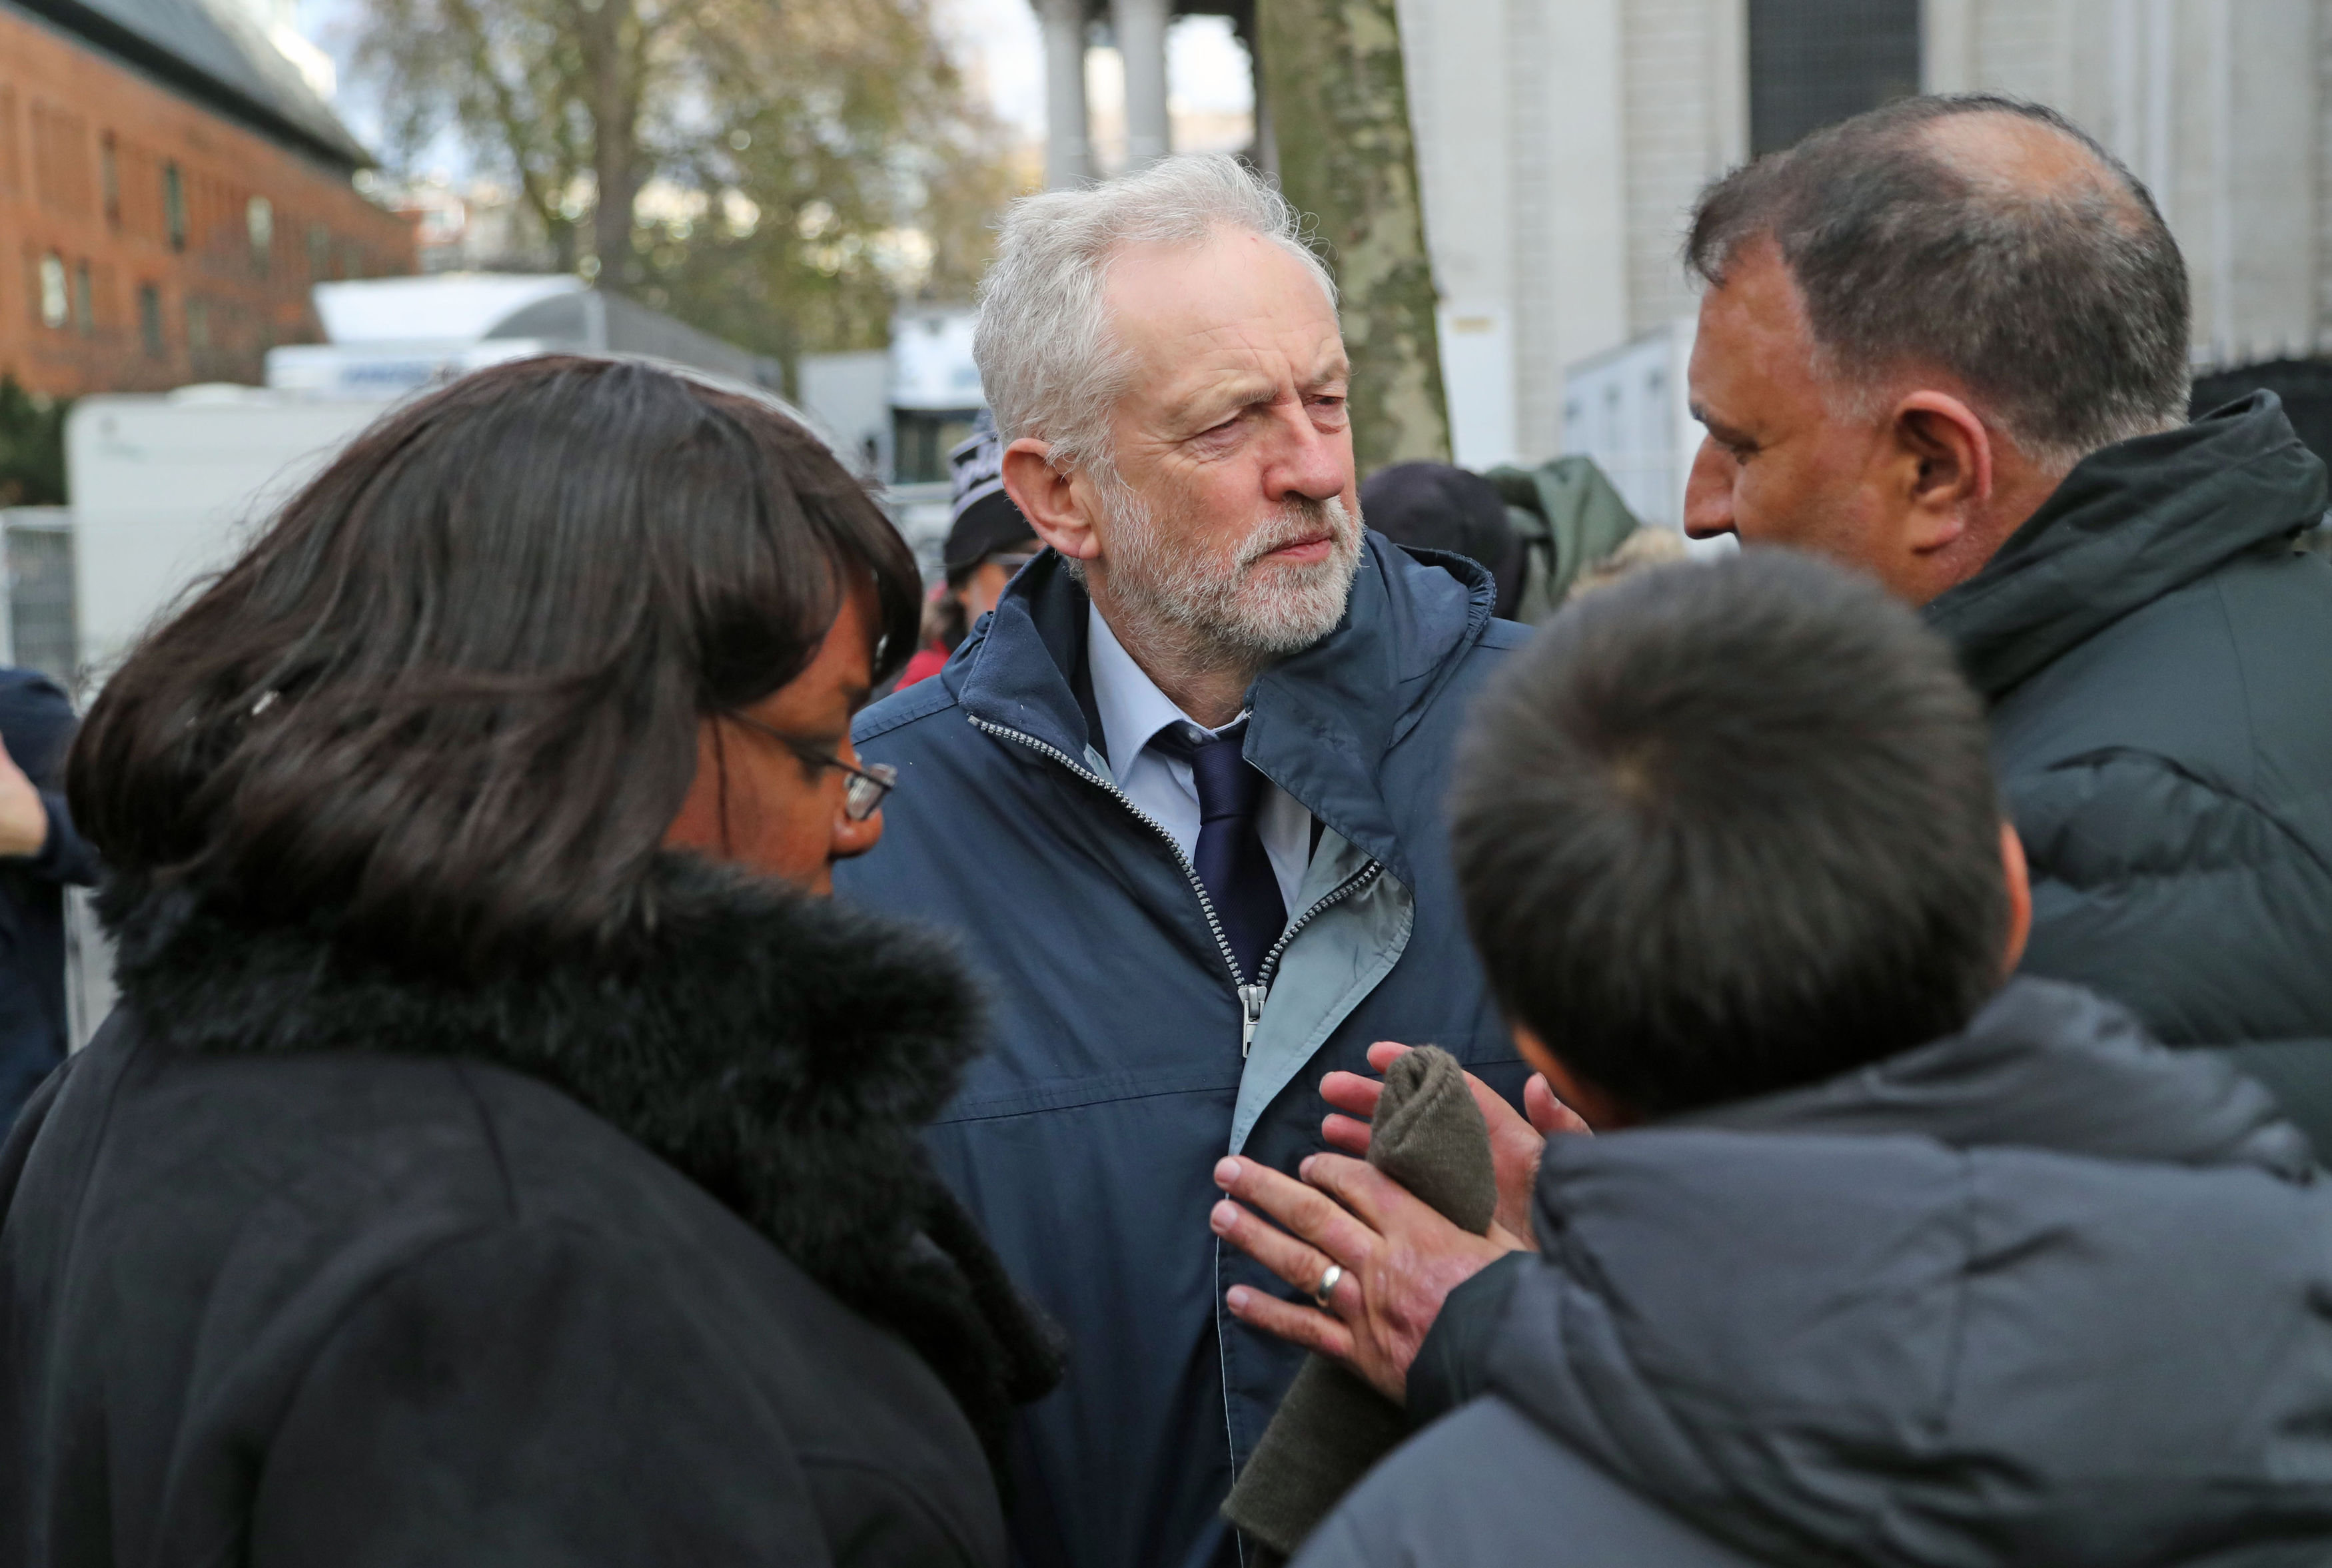 Labour Party leader Jeremy Corbyn and shadow home secretary Diane Abbott speak with people after theservice